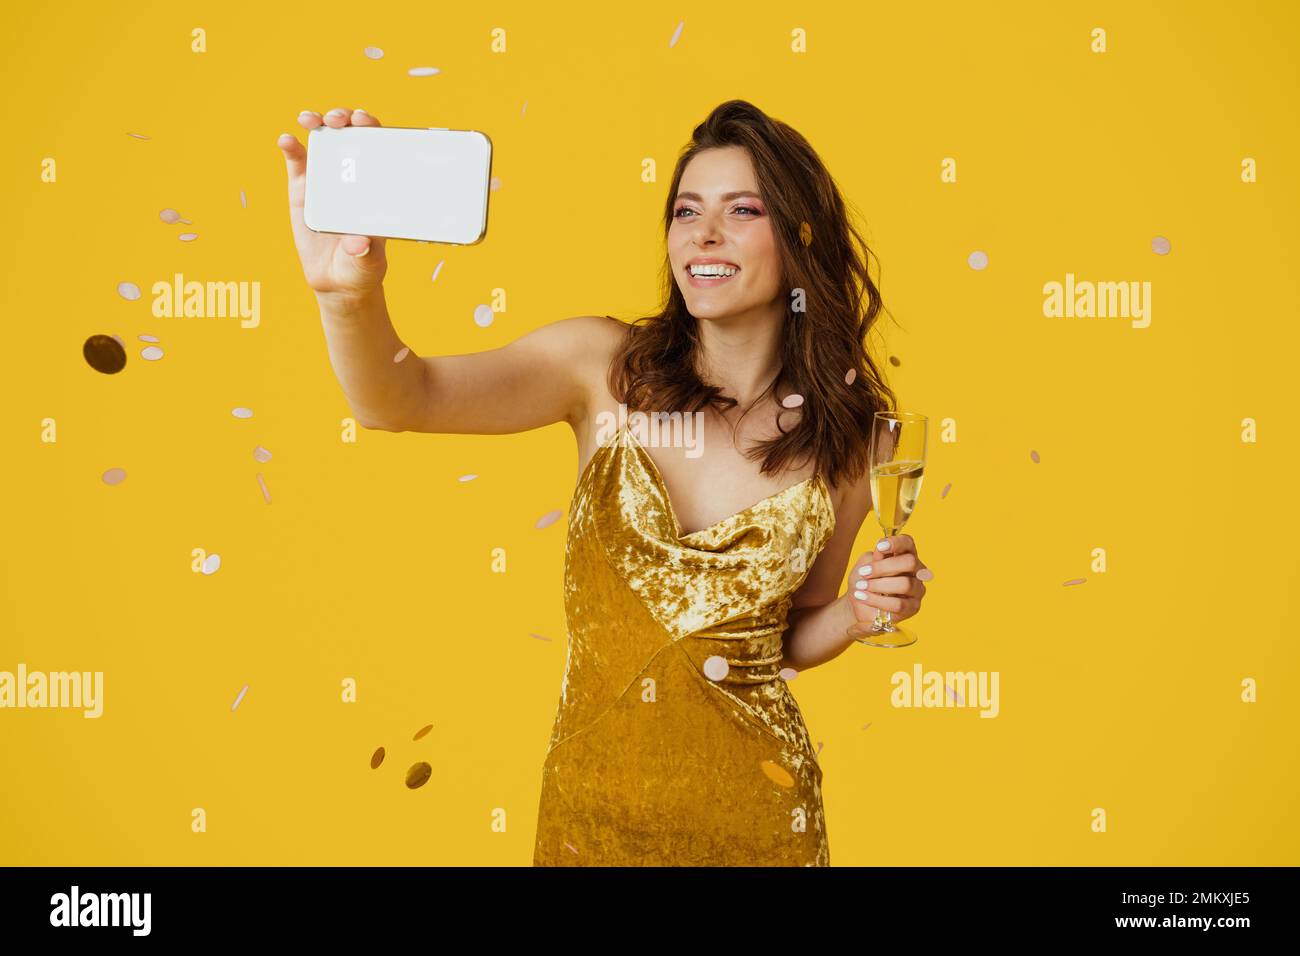 Happy woman in stylish dress taking selfie with glass of champagne, yellow studio background with falling confetti Stock Photo